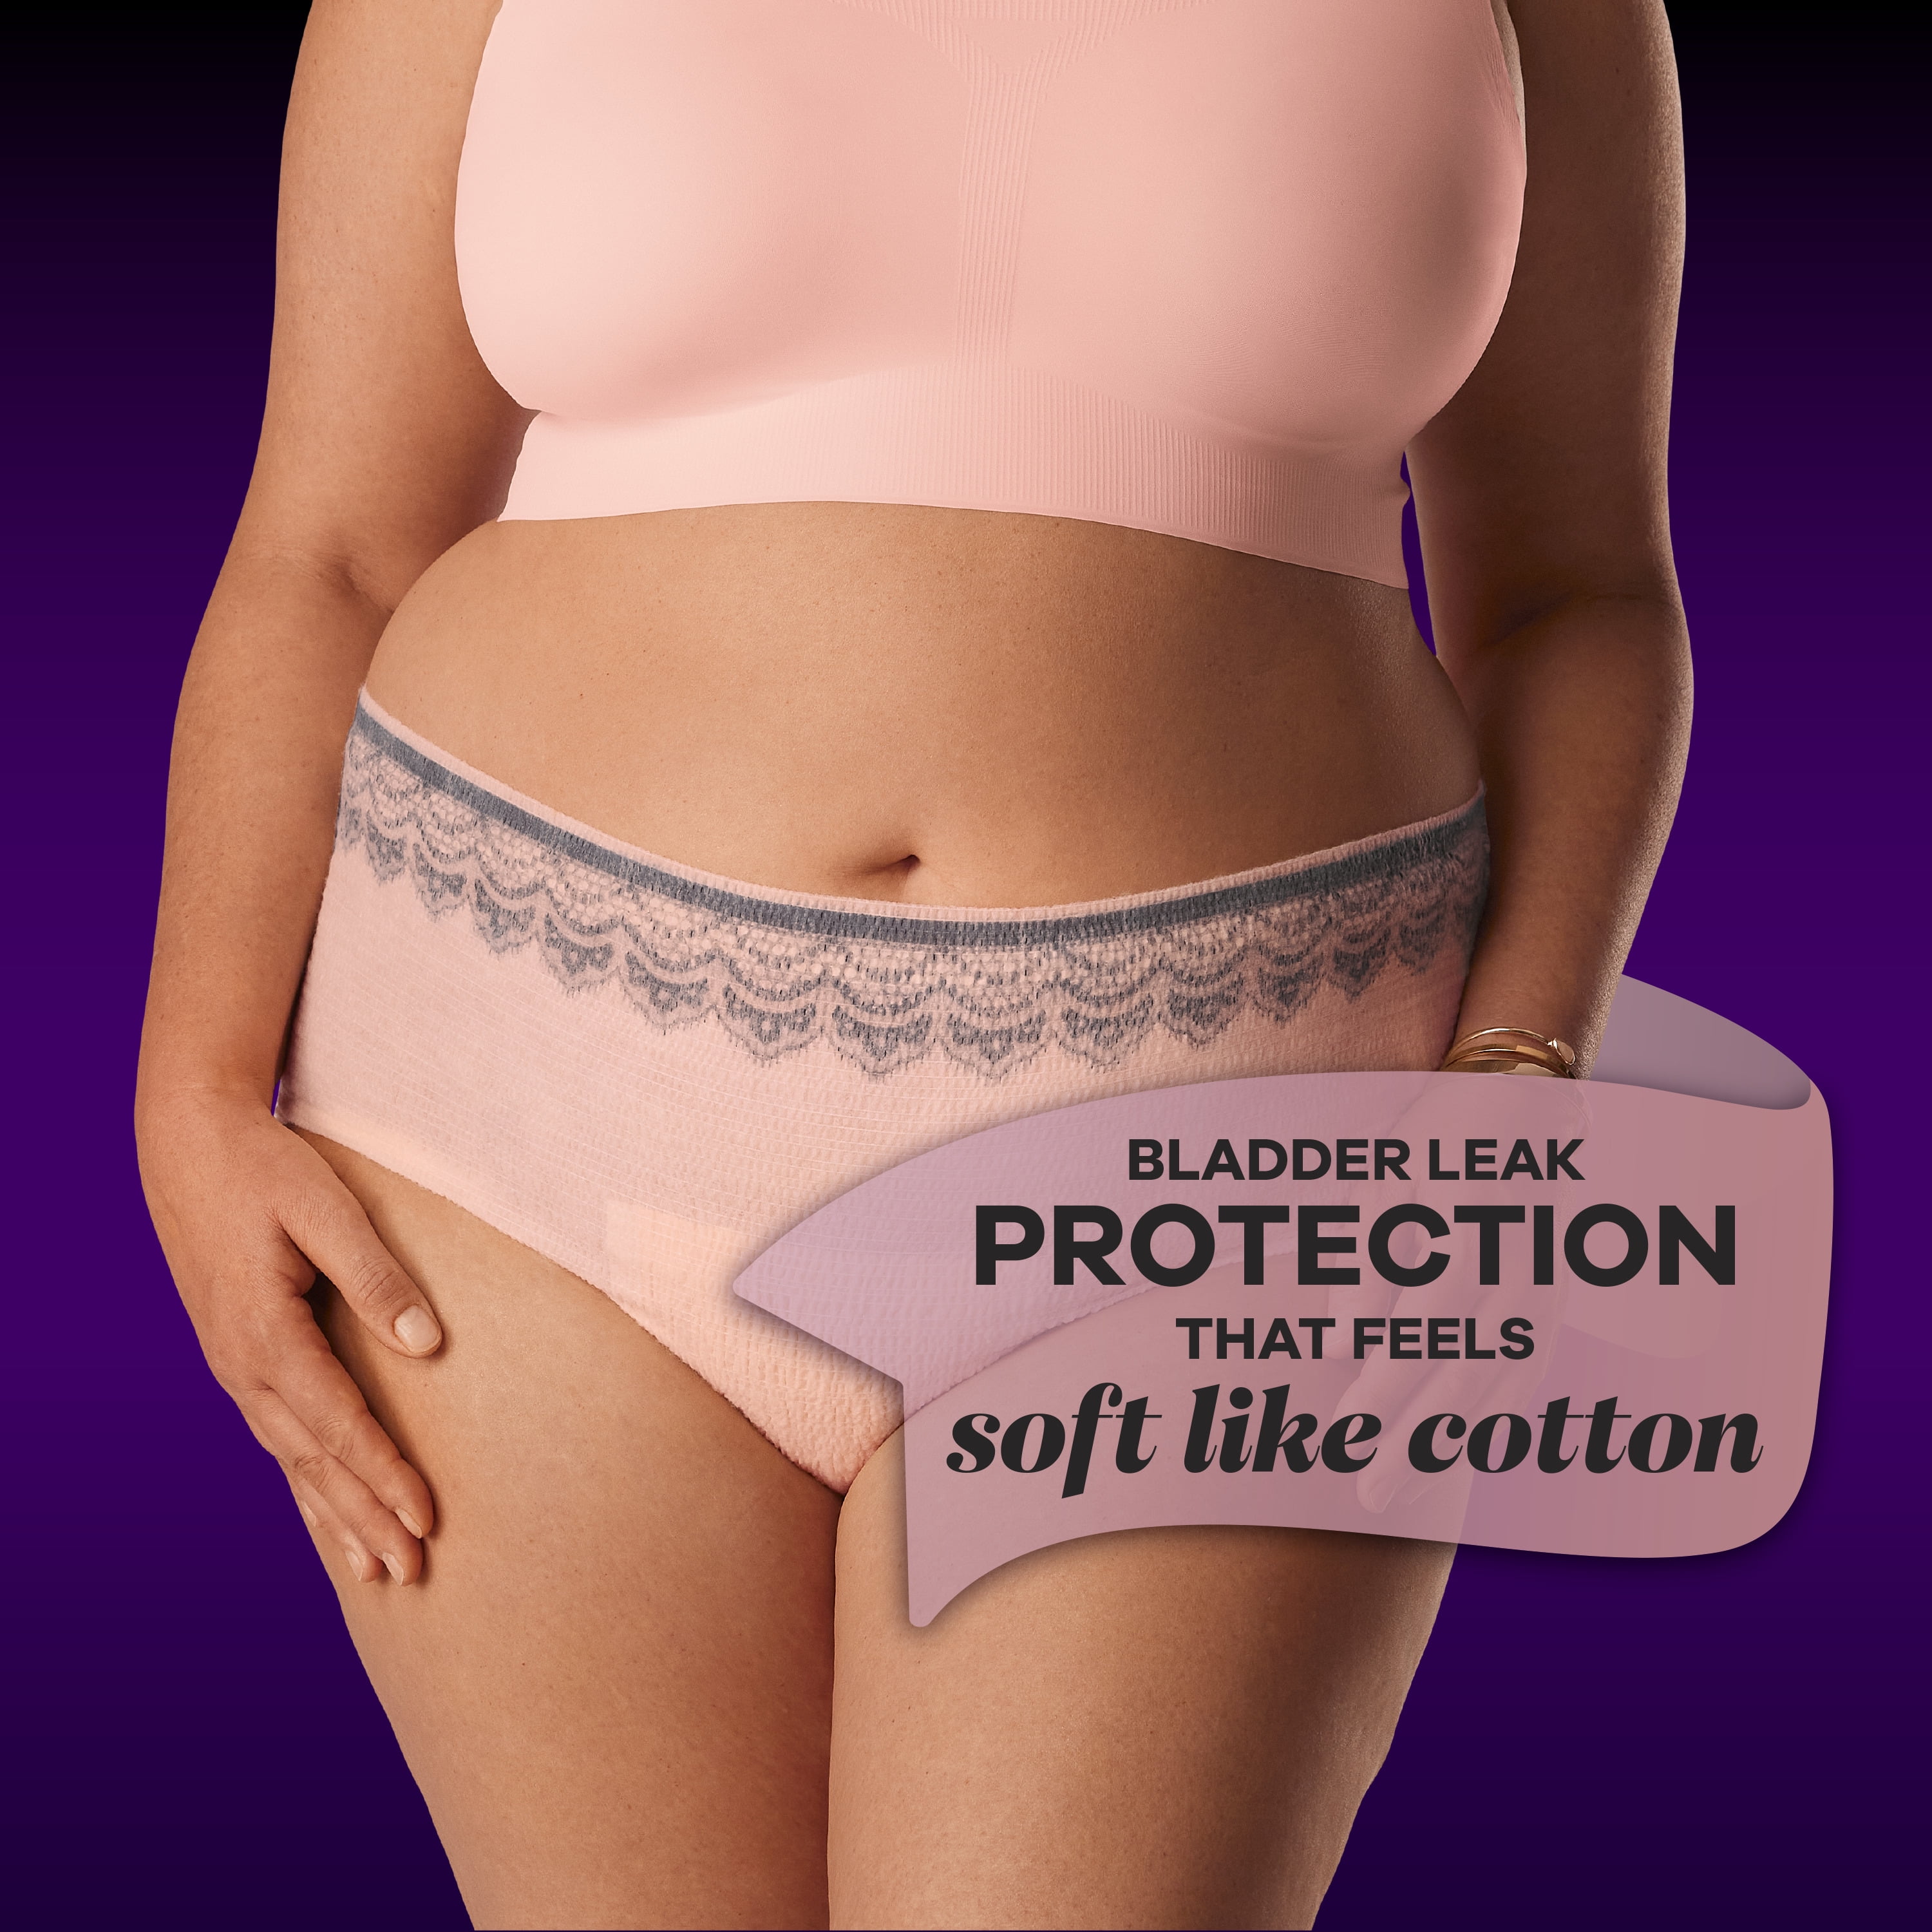 Always Discreet Boutique Incontinence Underwear, Maximum Protection, Size  S/M, Rosy, 12 Ct 